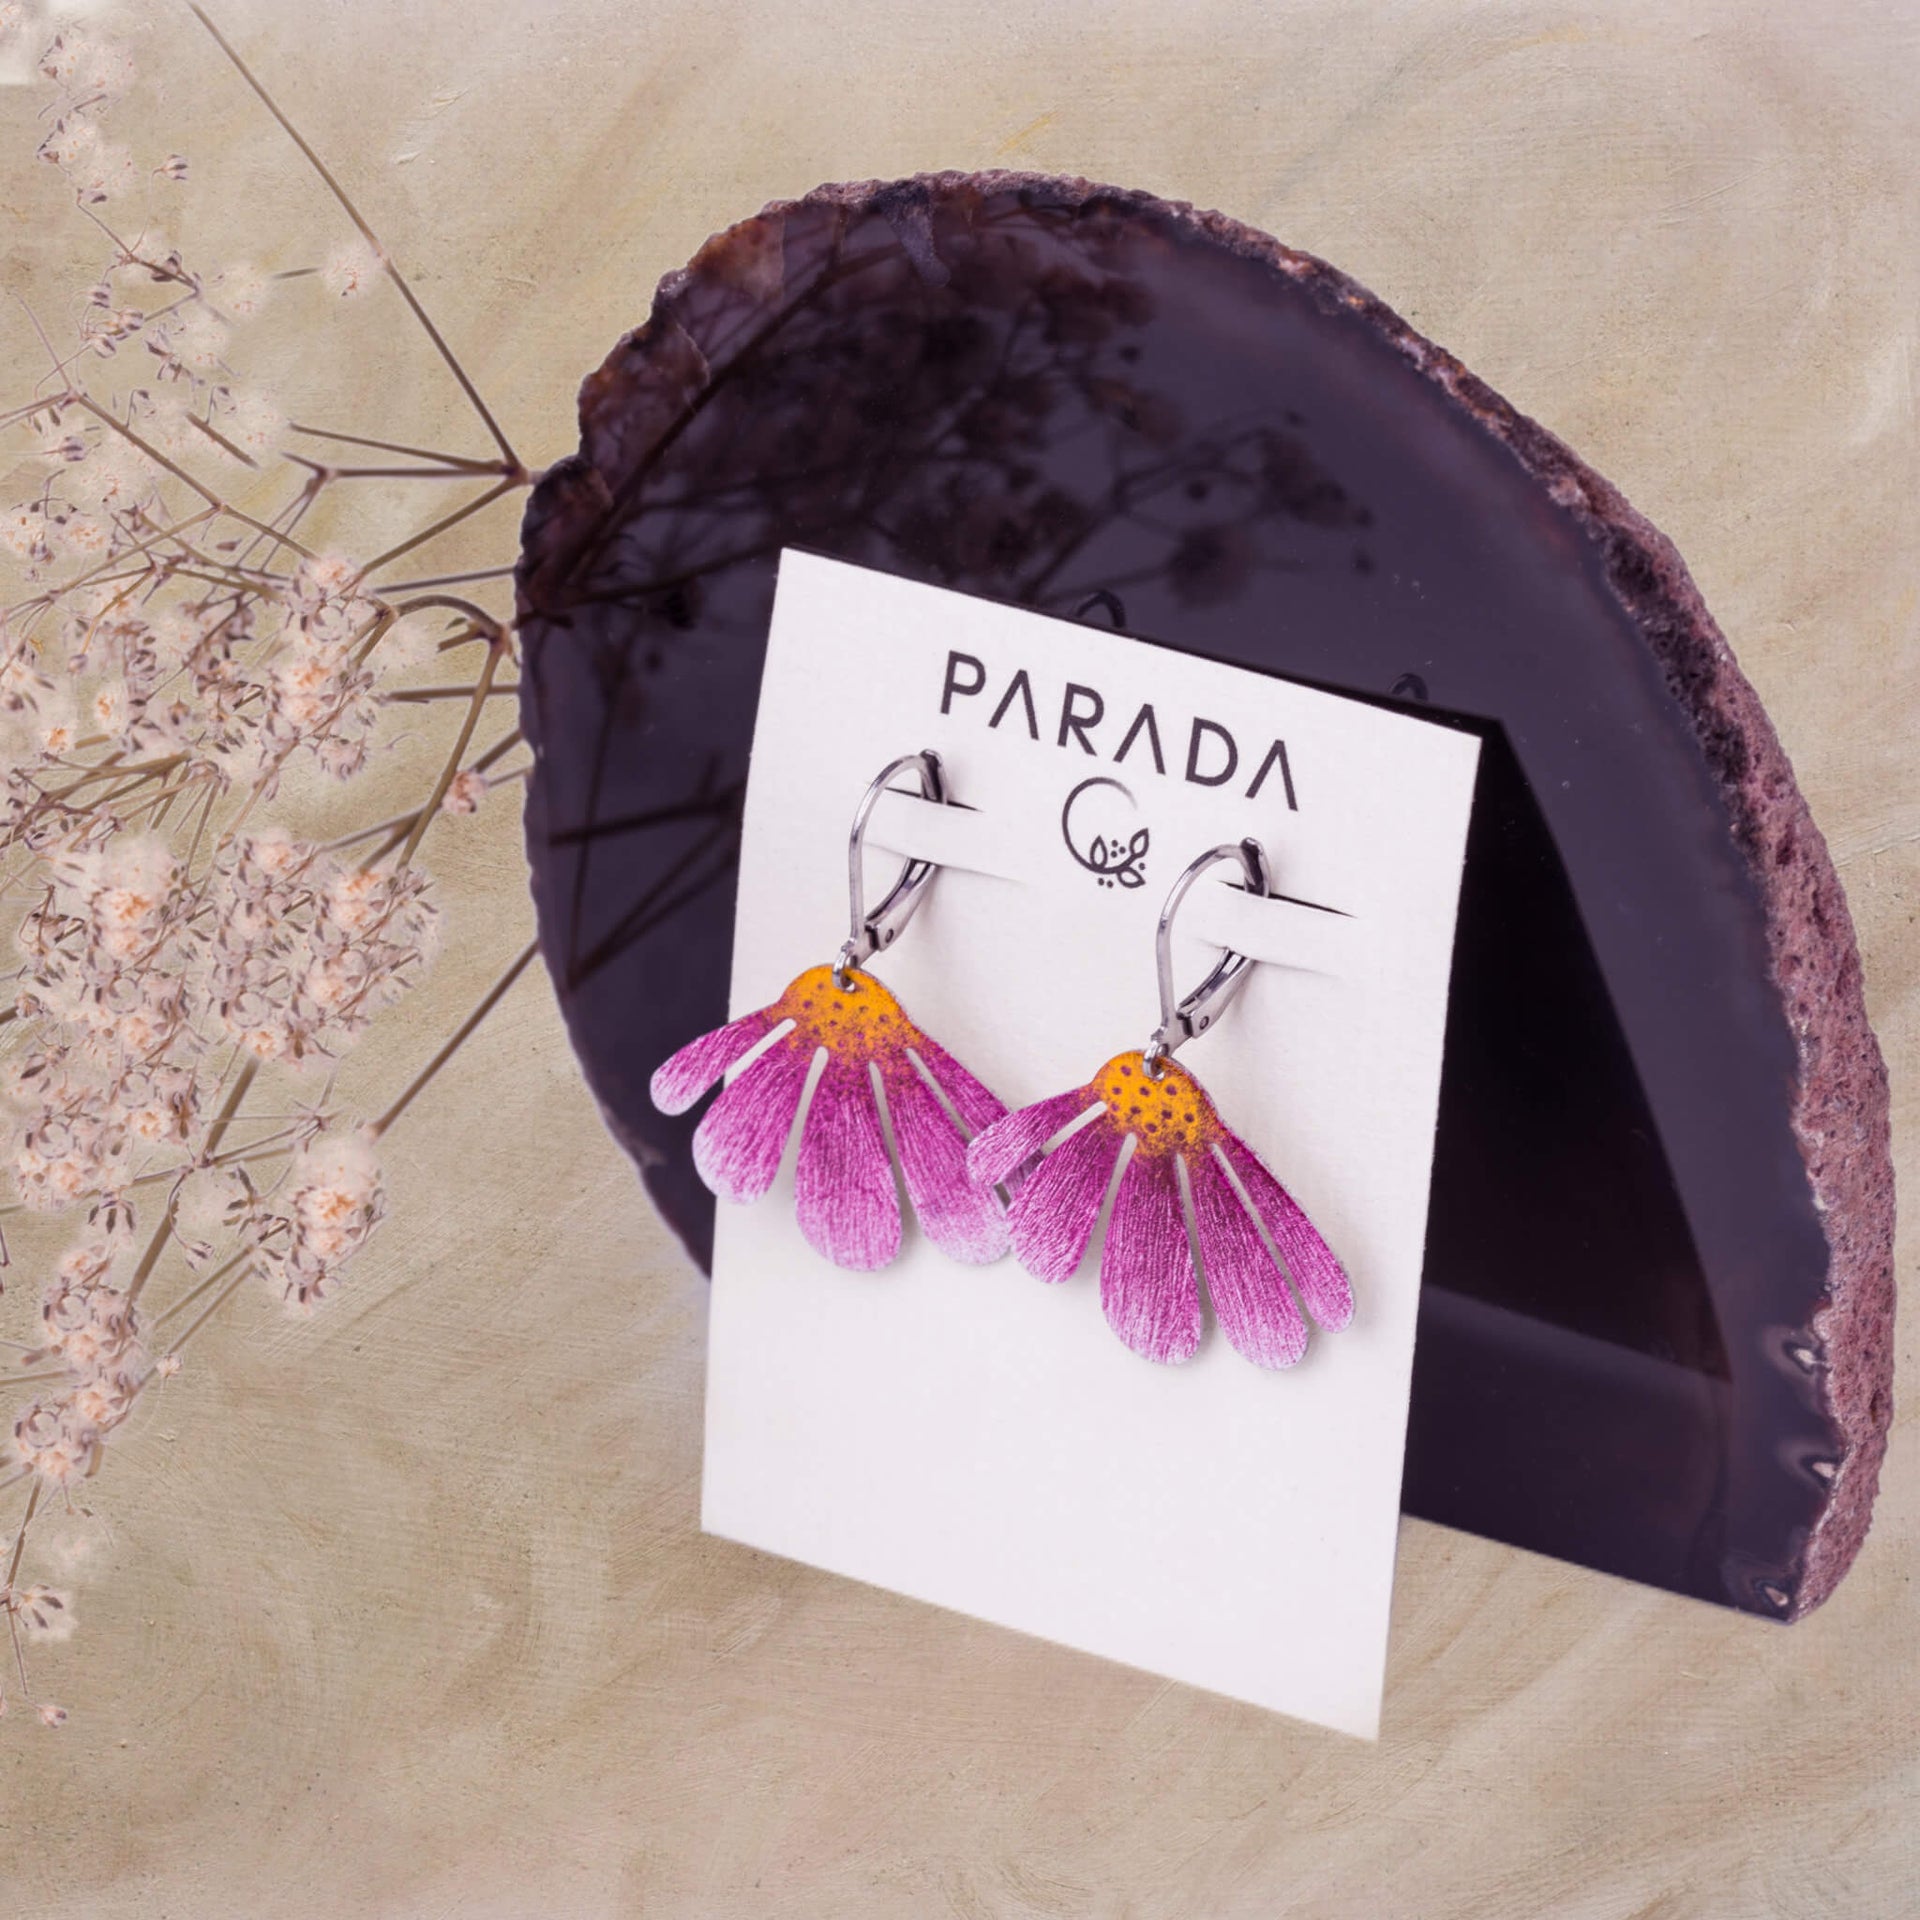 a stylized photo of handmade echinacea earrings displayed on a branded card PARADA